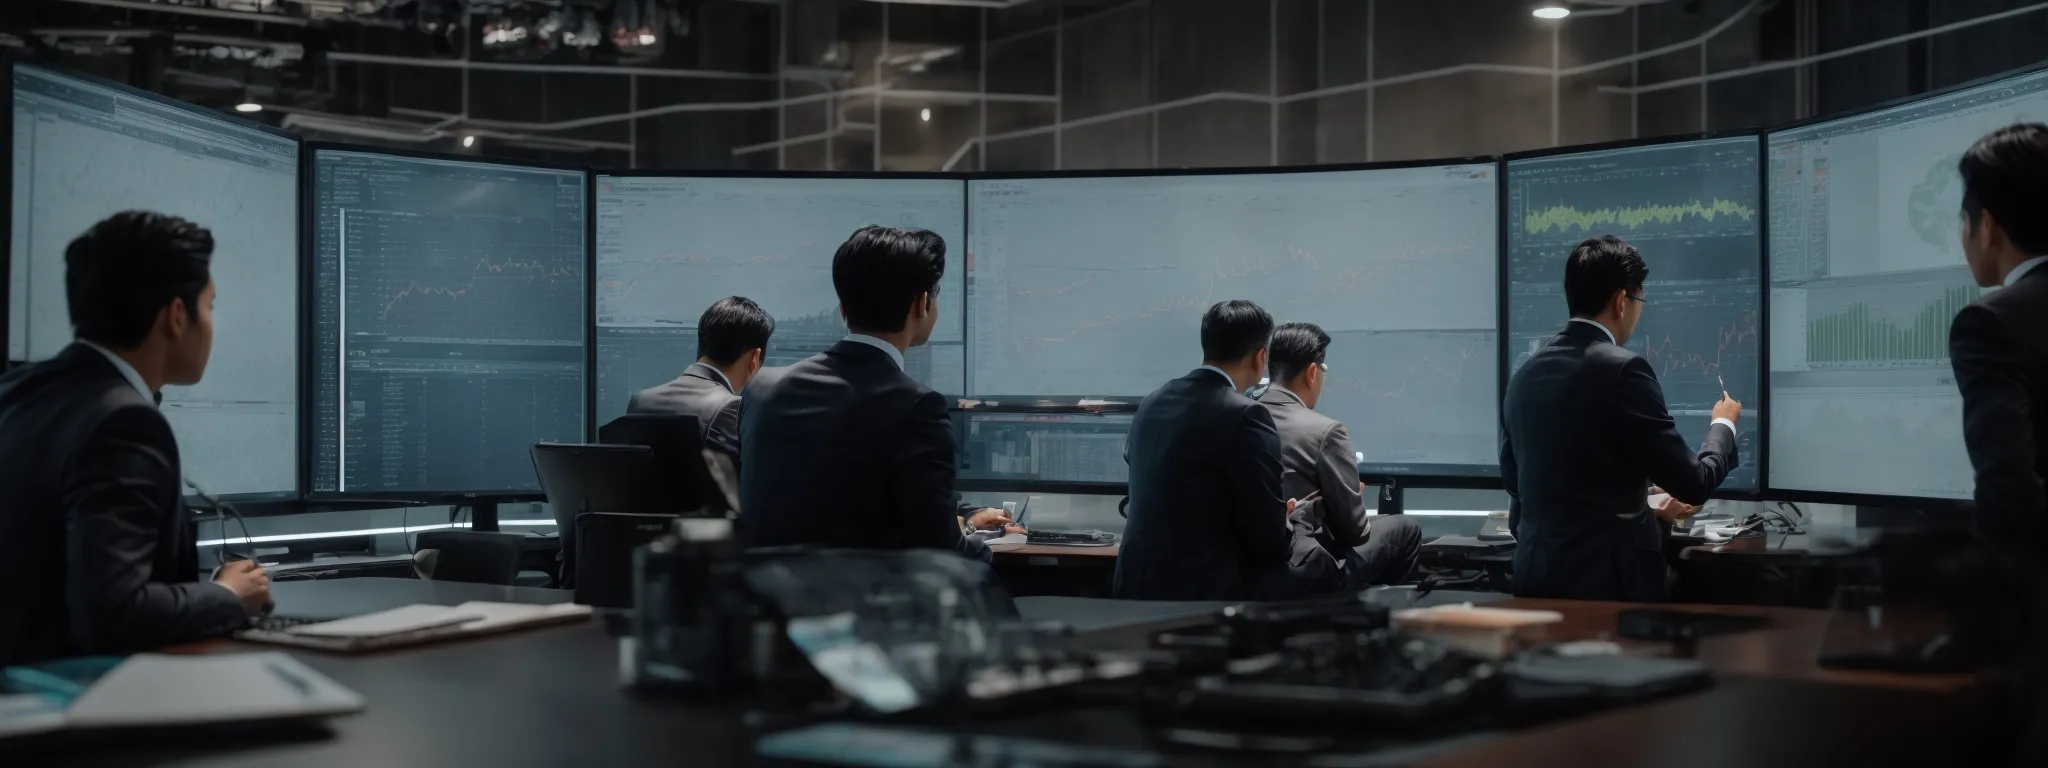 a group of professionals intently studies a large infographic on a monitor, revealing key seo metrics.